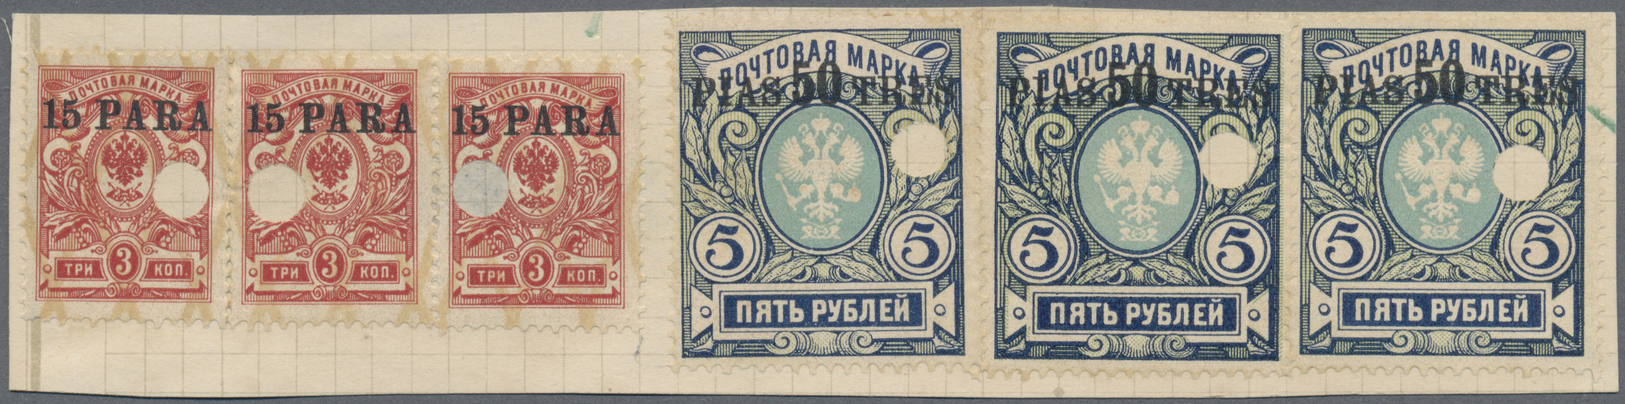 Brrst Russische Post In Der Levante - Staatspost: 1913, 3 Stamps 15 Pa. On 3 Kop. And 3 Items 50 Pia. On 5 R. Unused - Levant